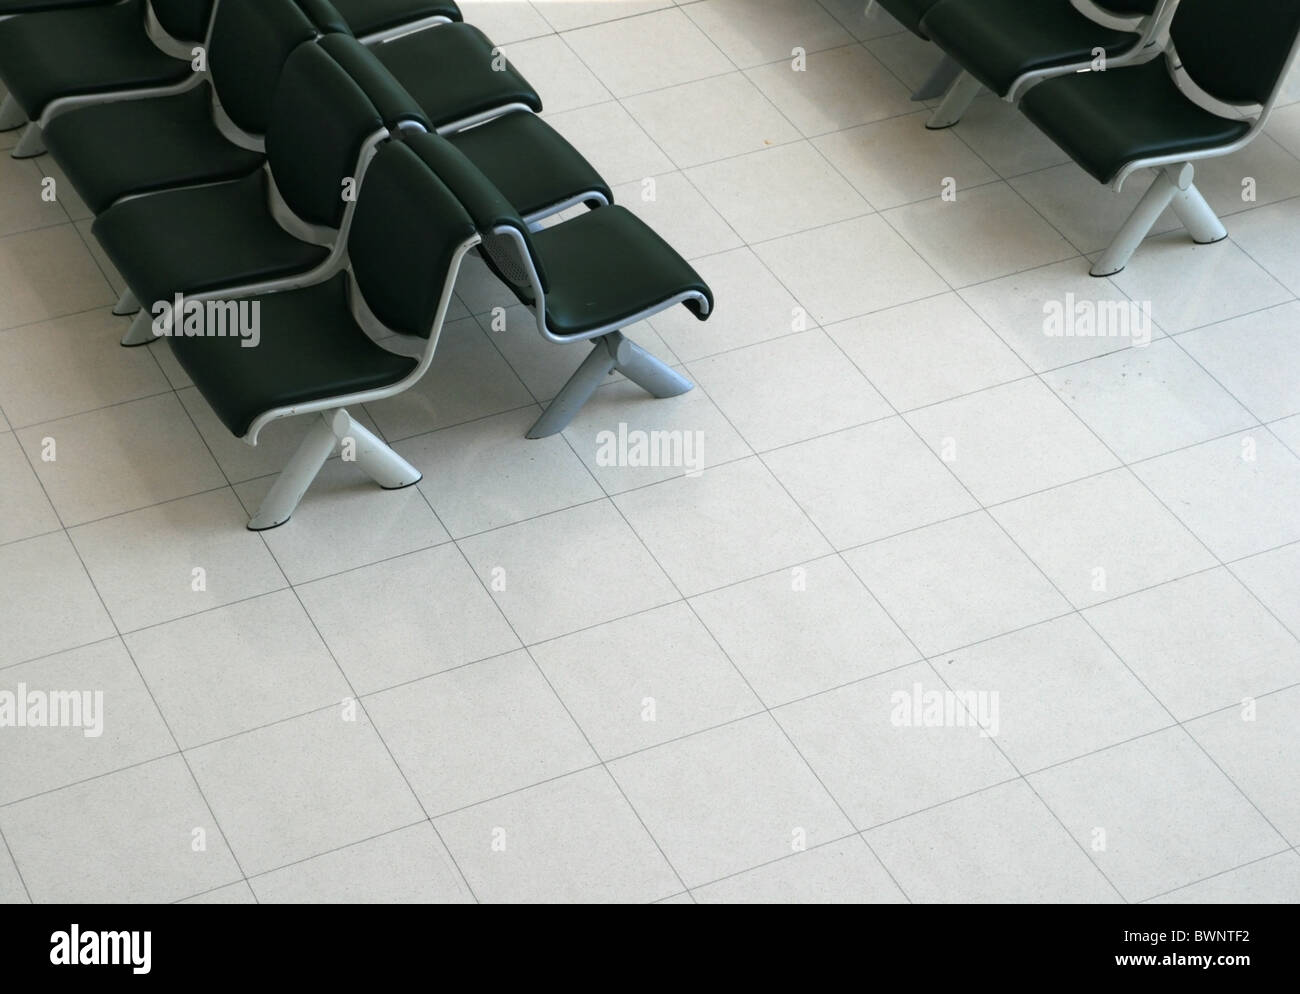 waiting area with black padded seats and light tile floor from above Stock Photo